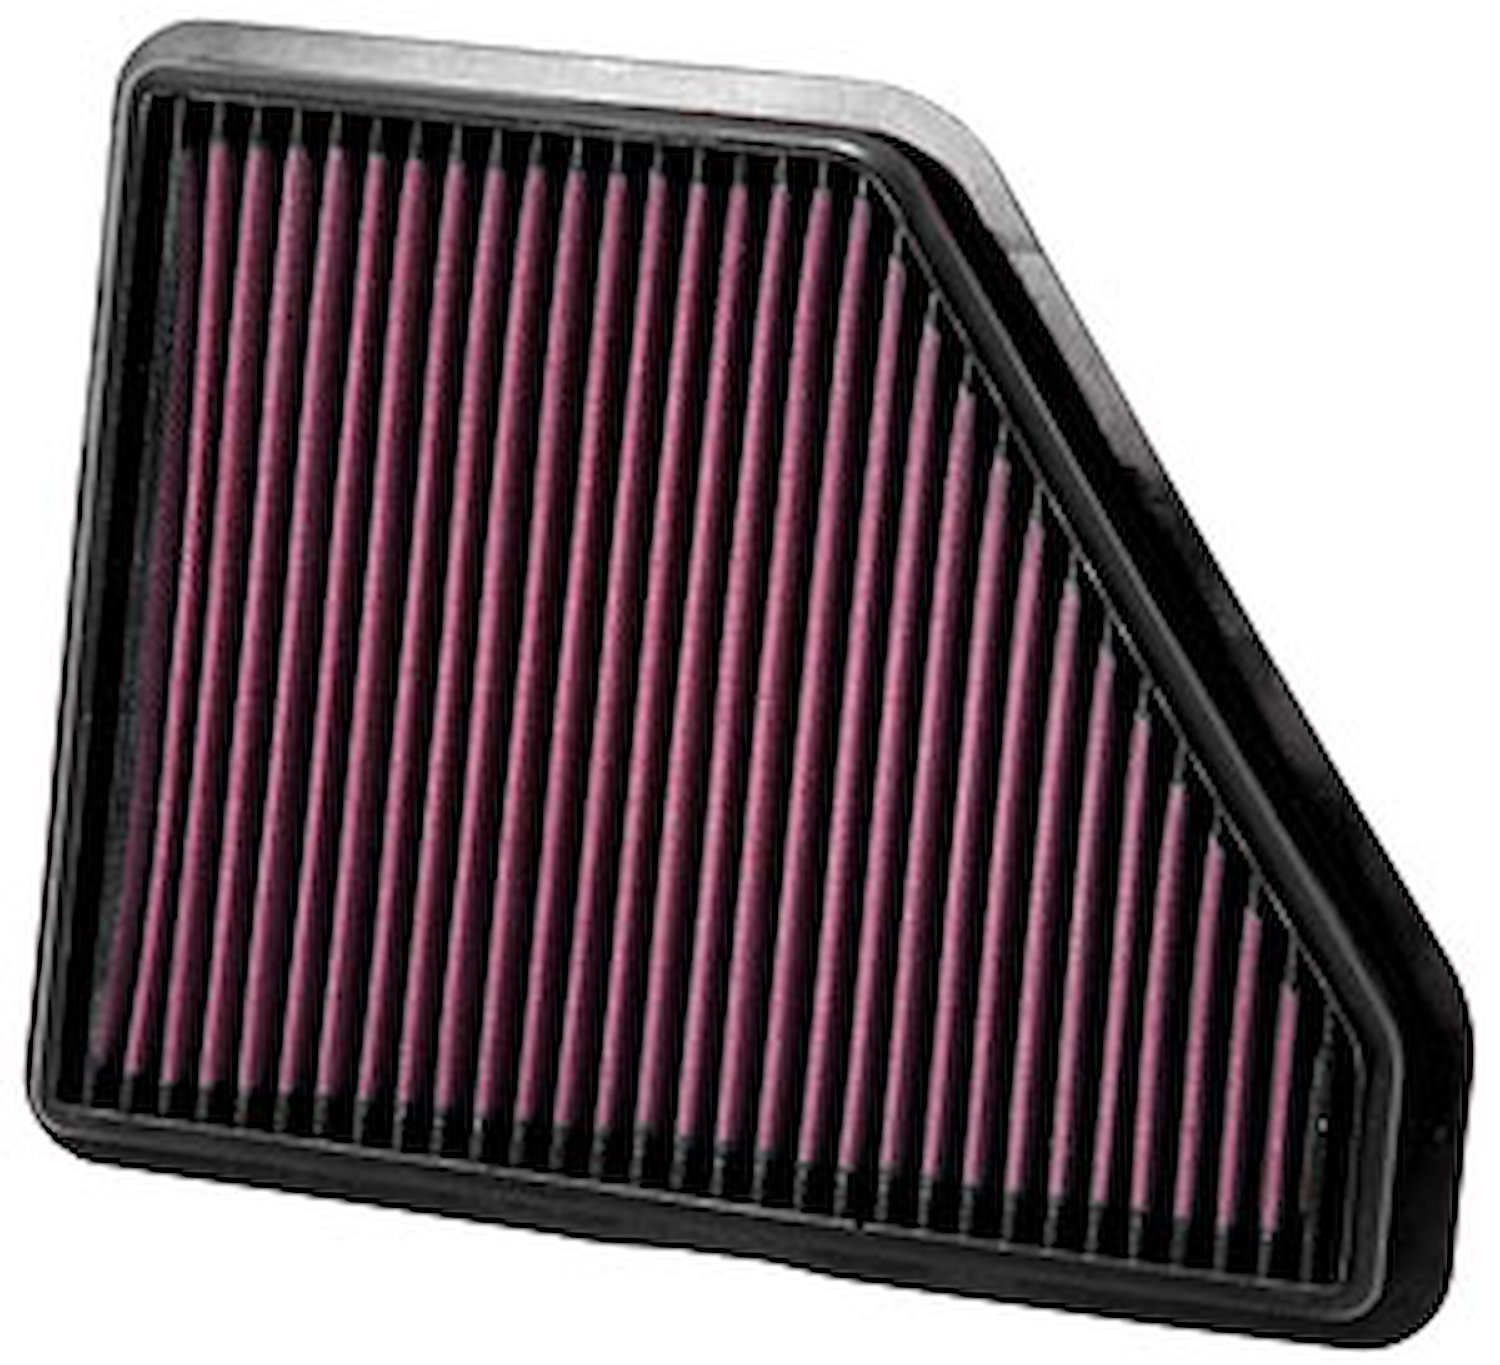 High-Performance OE-Style Replacement Filter 2010-13 GMC Terrain 2.4/3.0L/3.6L 2010-13 Chevy Equinox 2.4/3.0L